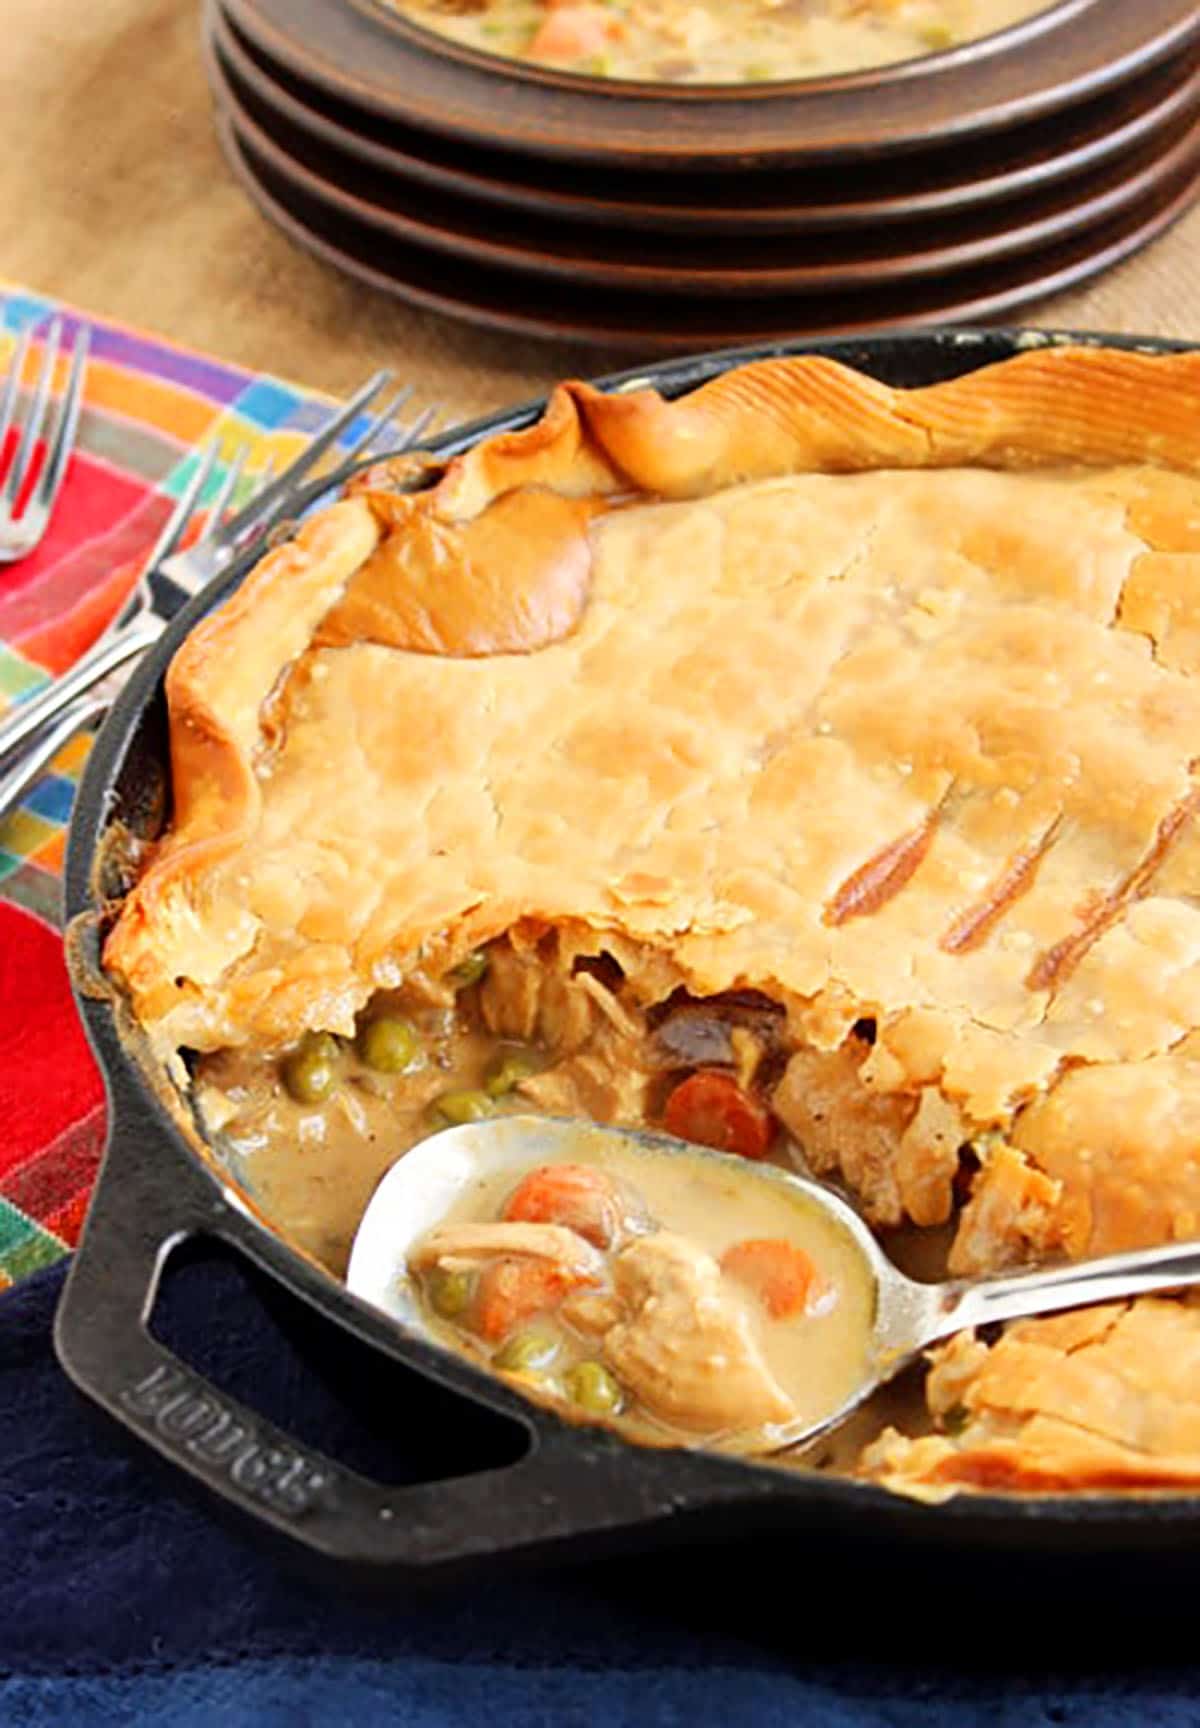 Chicken pot pie in a skillet with a spoon scooping it out and a plate in the background.